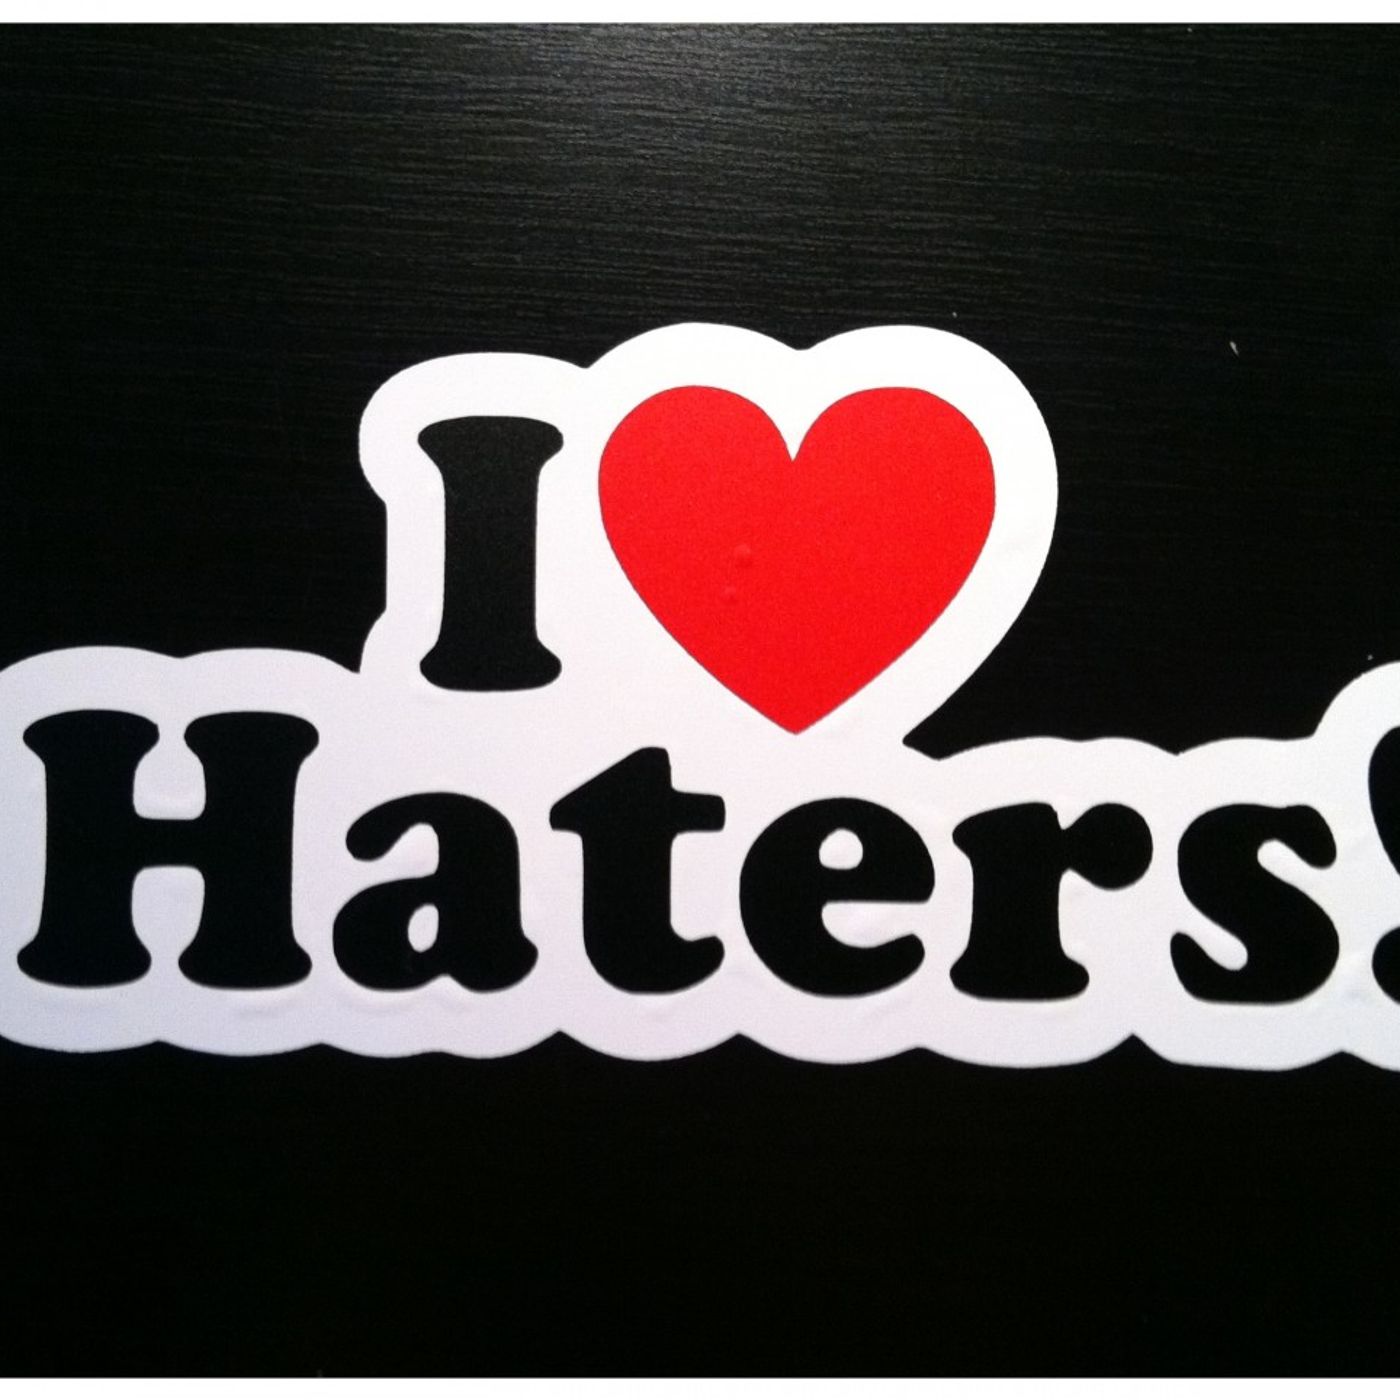 Haters and Negativity